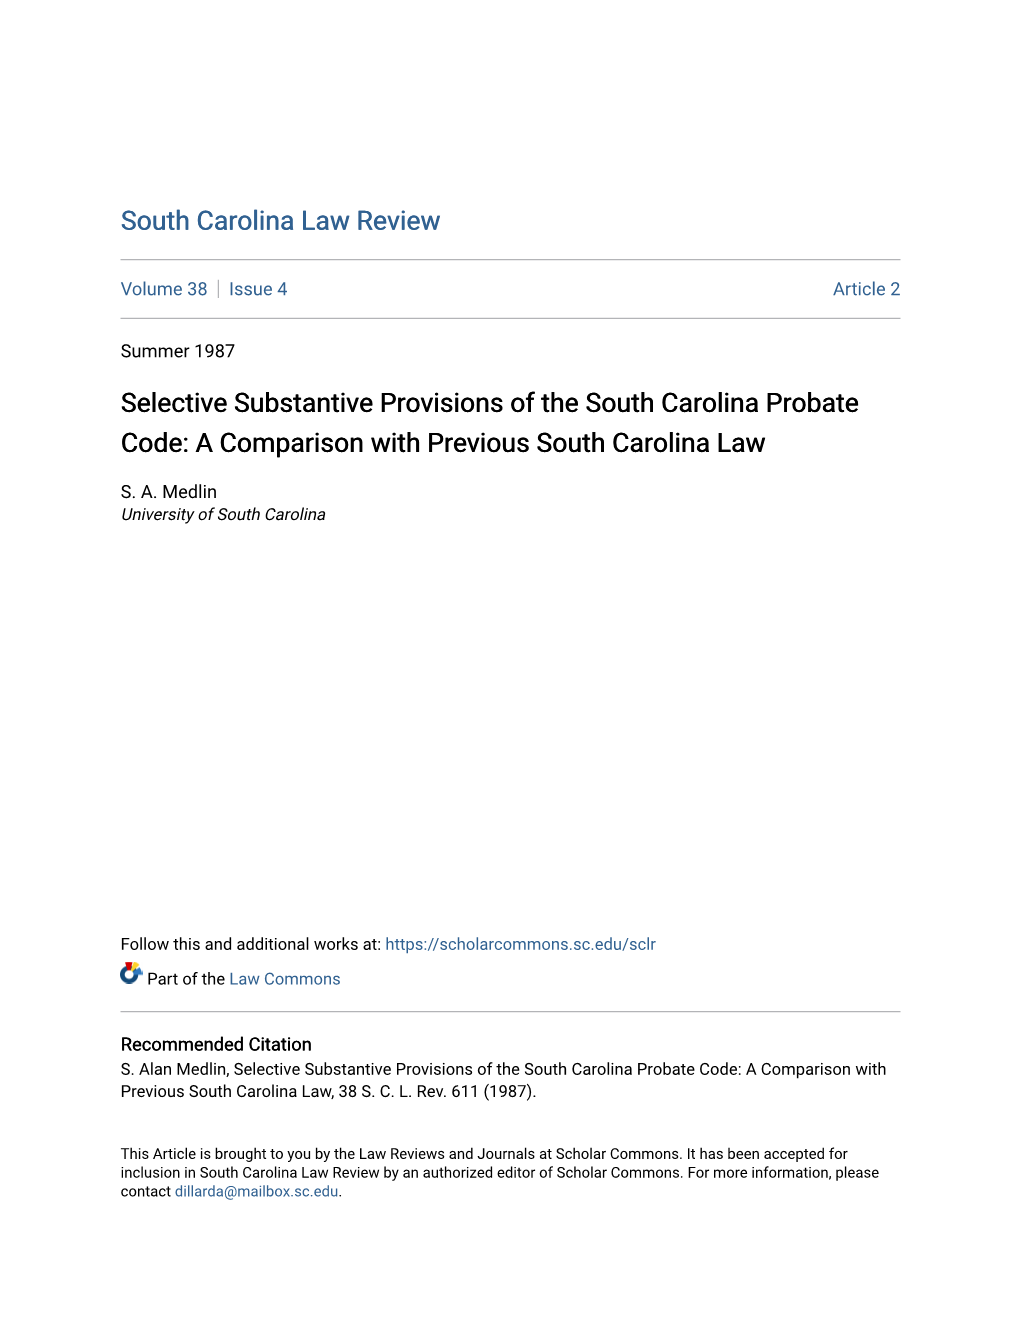 Selective Substantive Provisions of the South Carolina Probate Code: a Comparison with Previous South Carolina Law